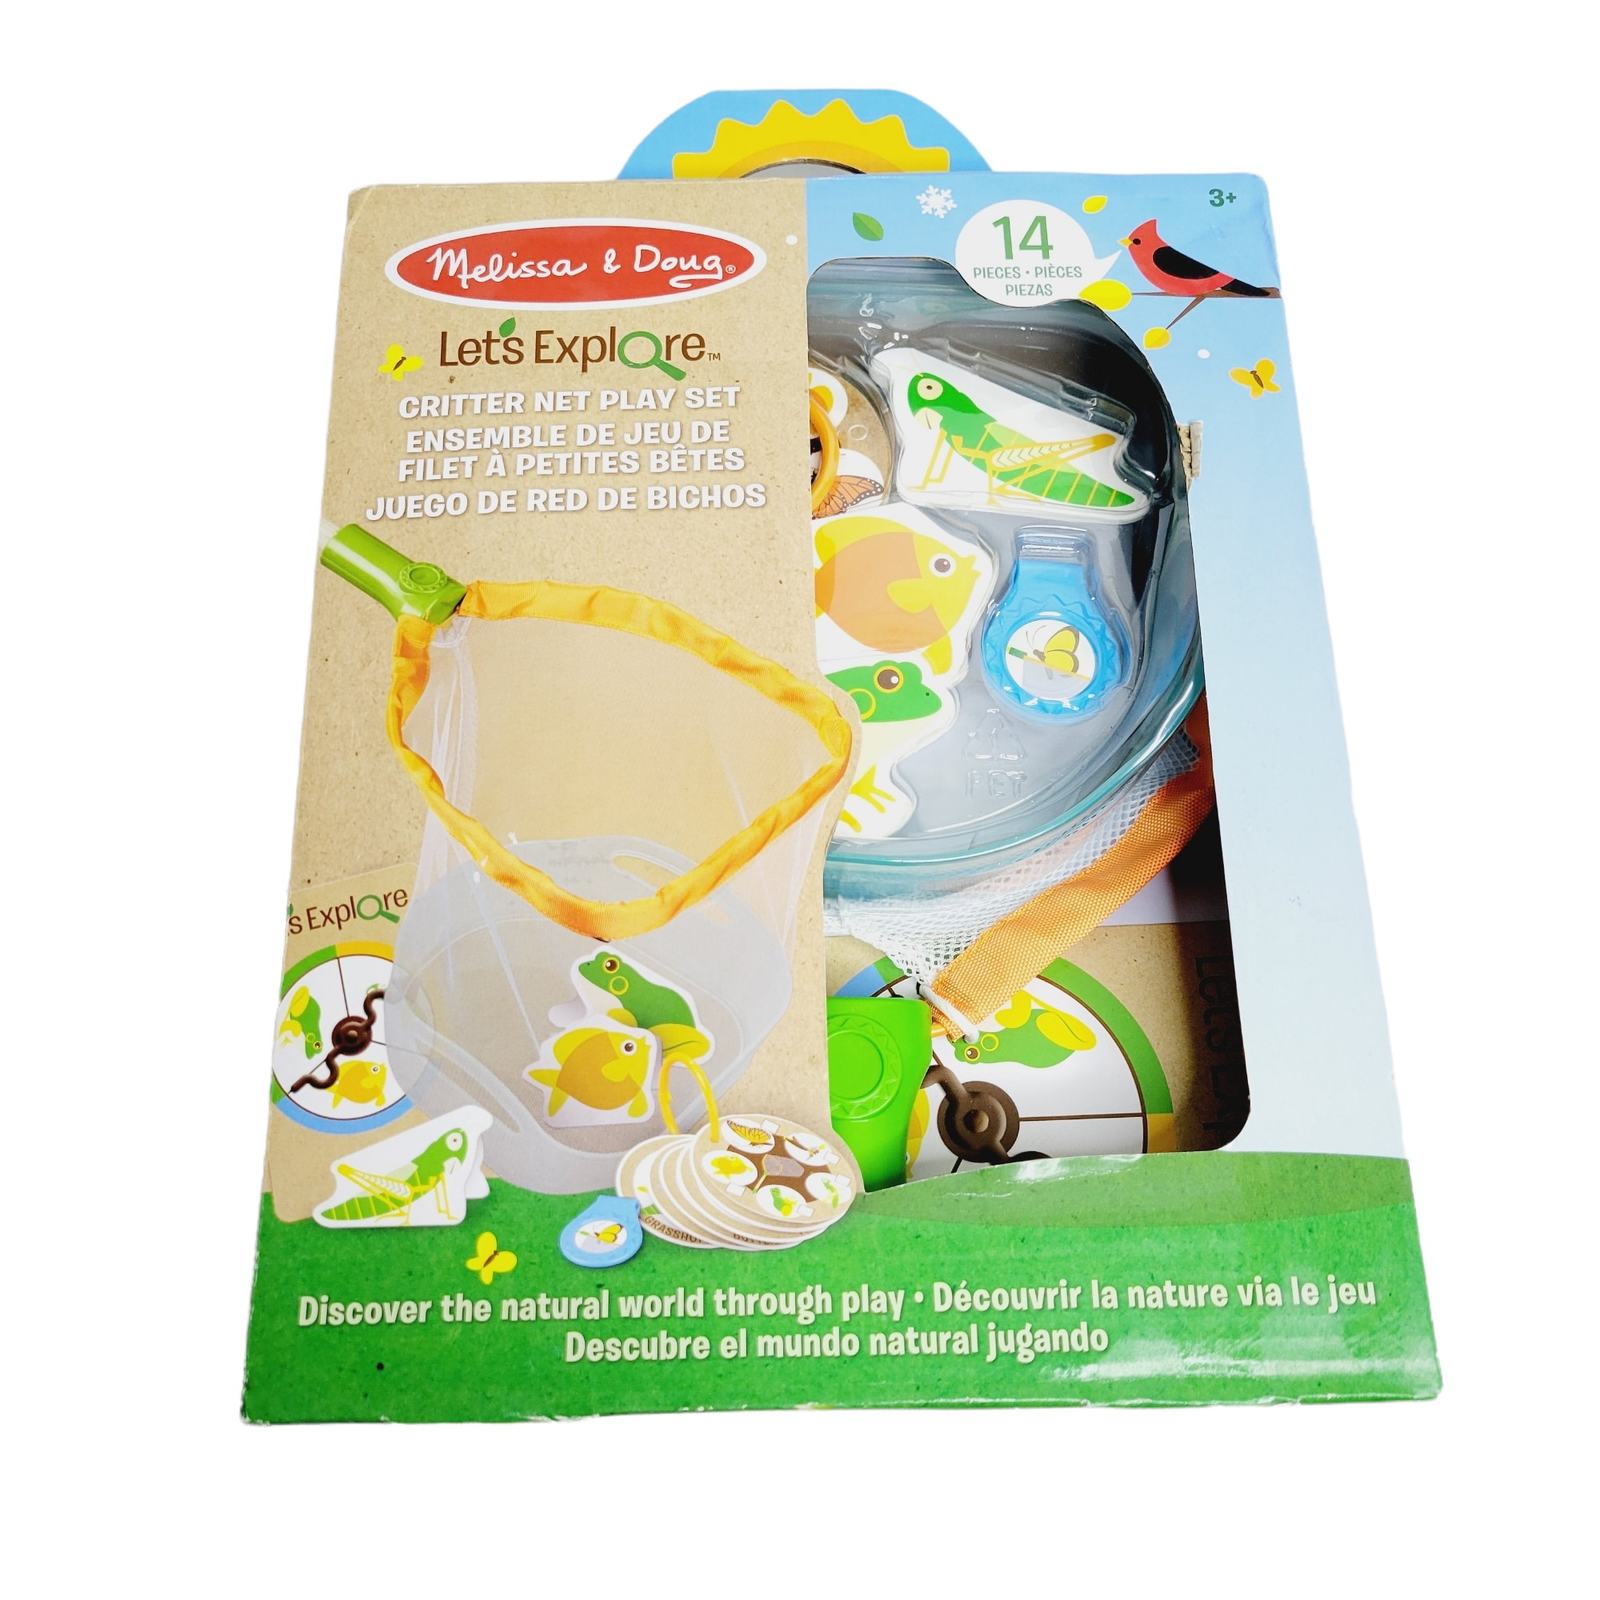 Primary image for Melissa & Doug Lets Explore Critter Net Play Set Ages 3+ 14 Pieces Kids Summer